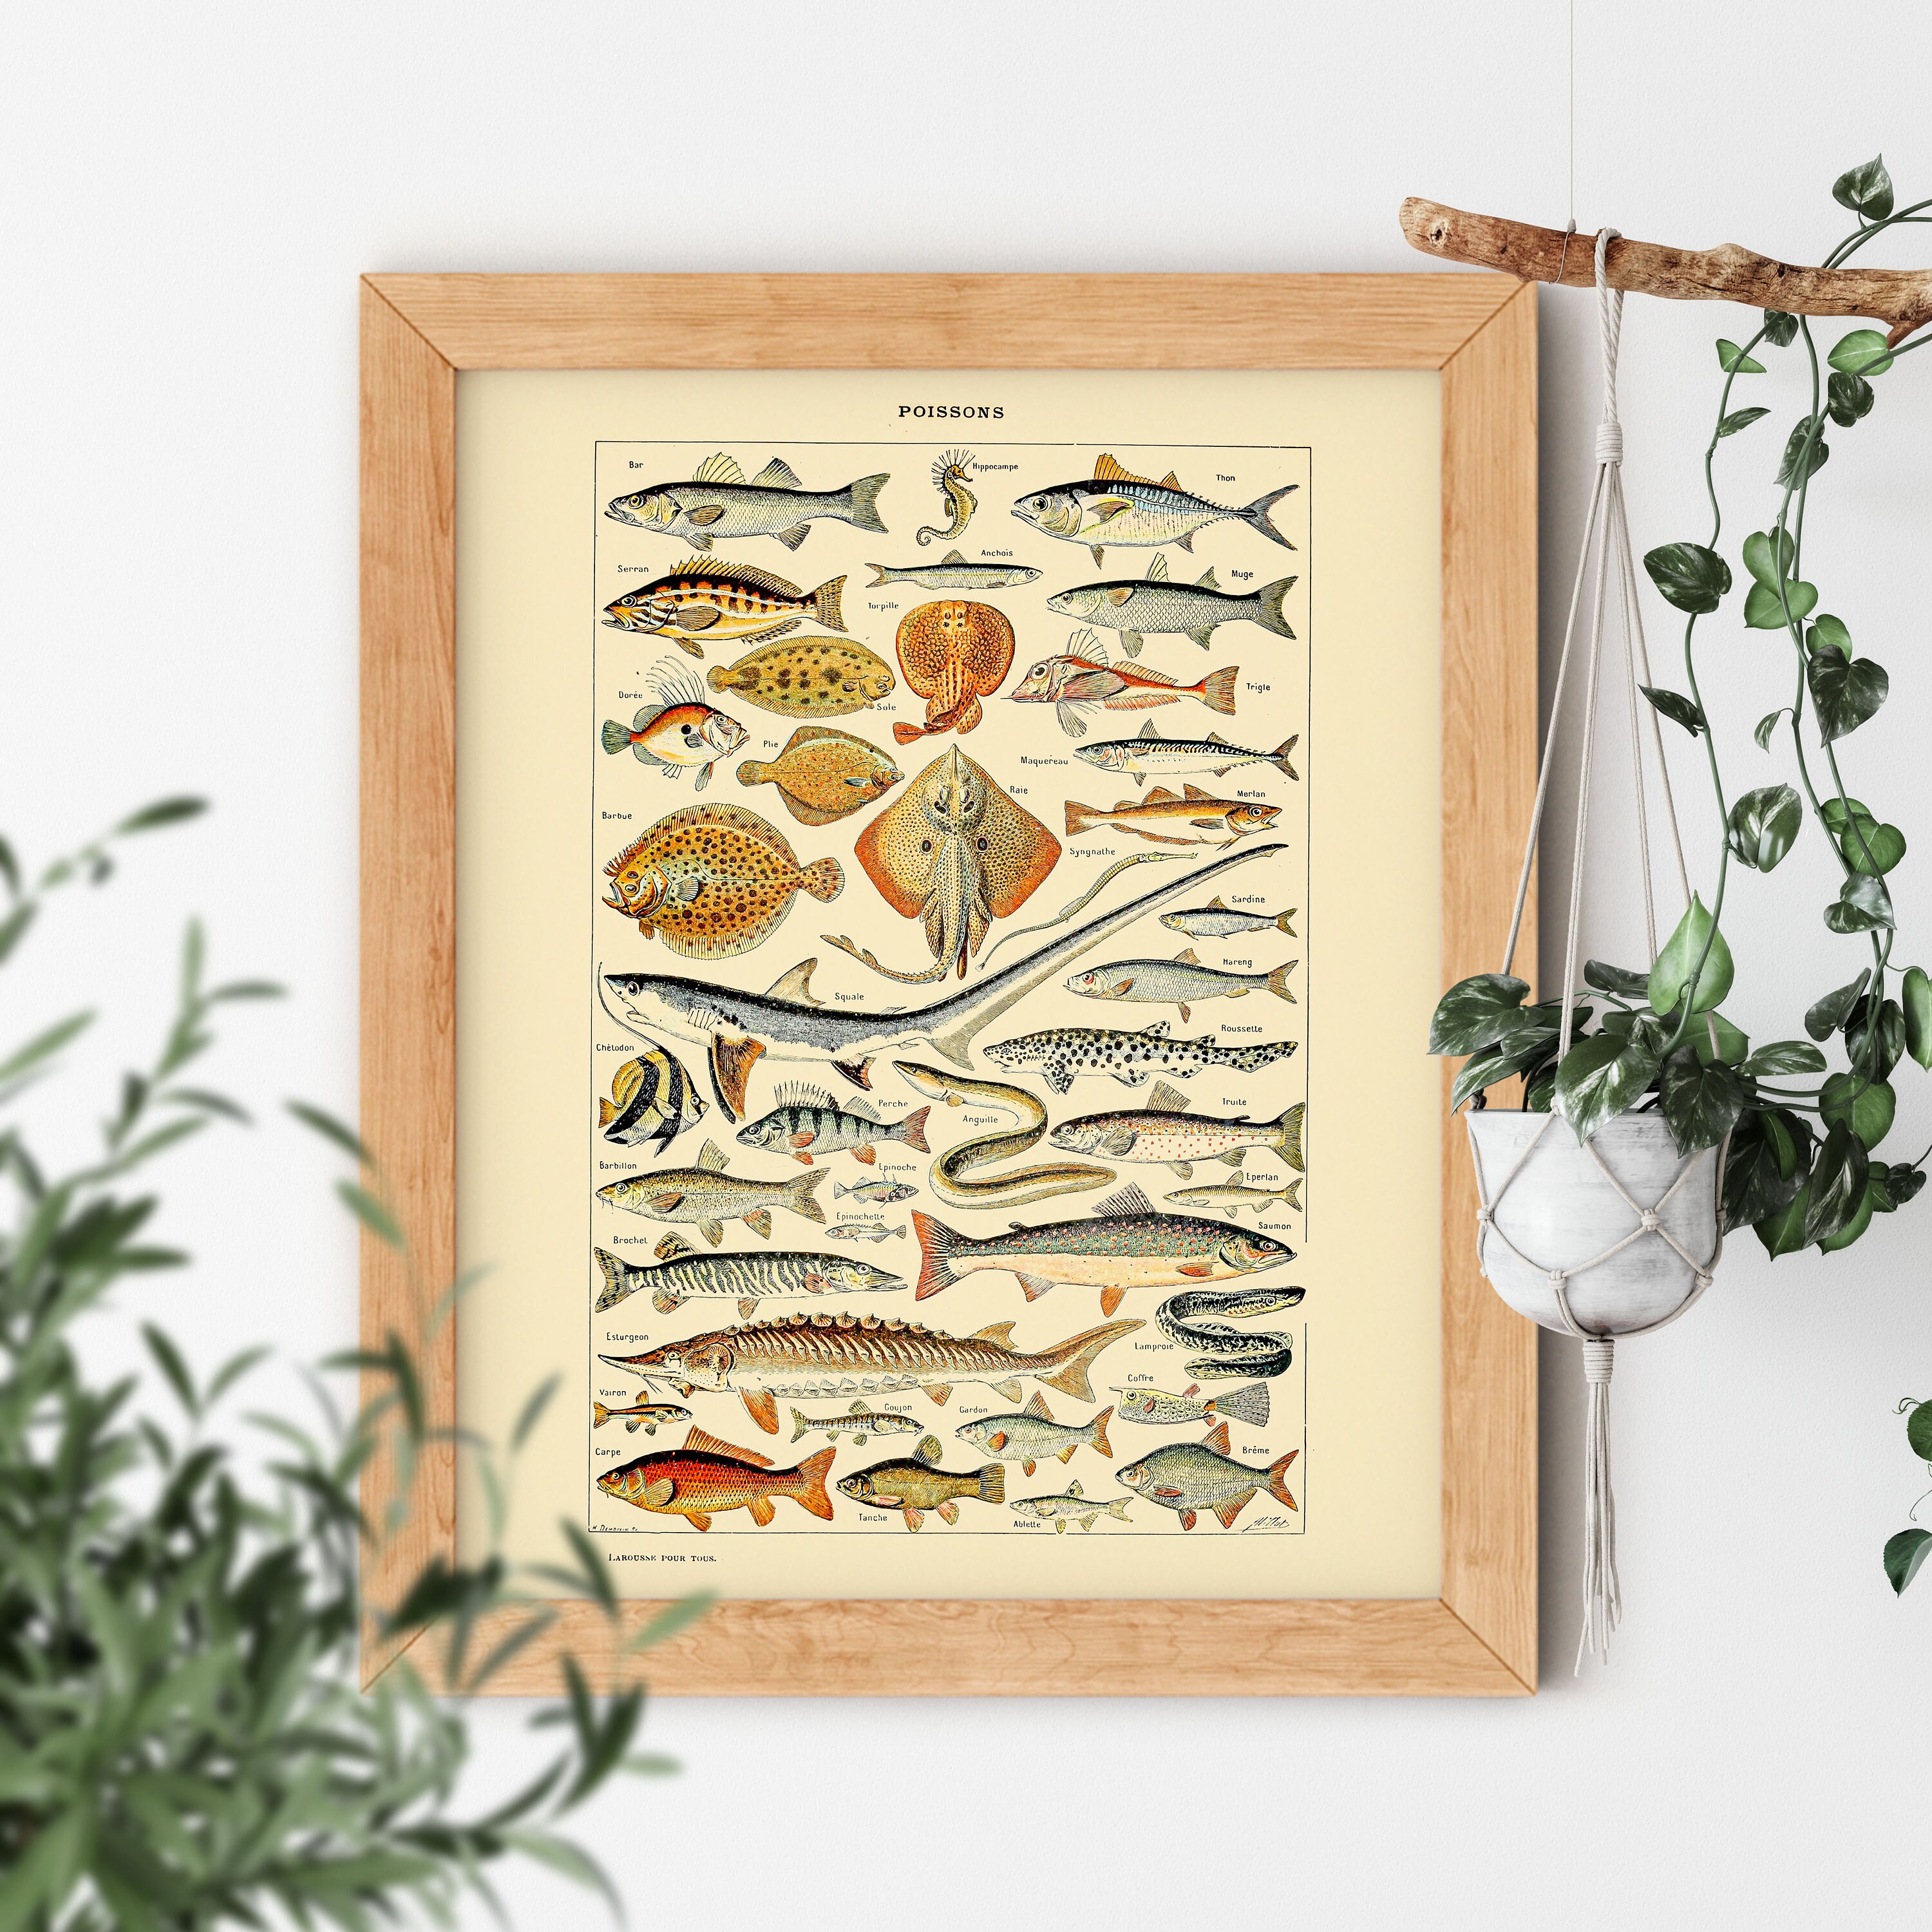 Vintage Aesthetic Poissons Fishing Shark Stingray Seafood Old Science Textbook Artwork Poster Adolphe Millot Room Decor Print 5x7 8x10 Inch